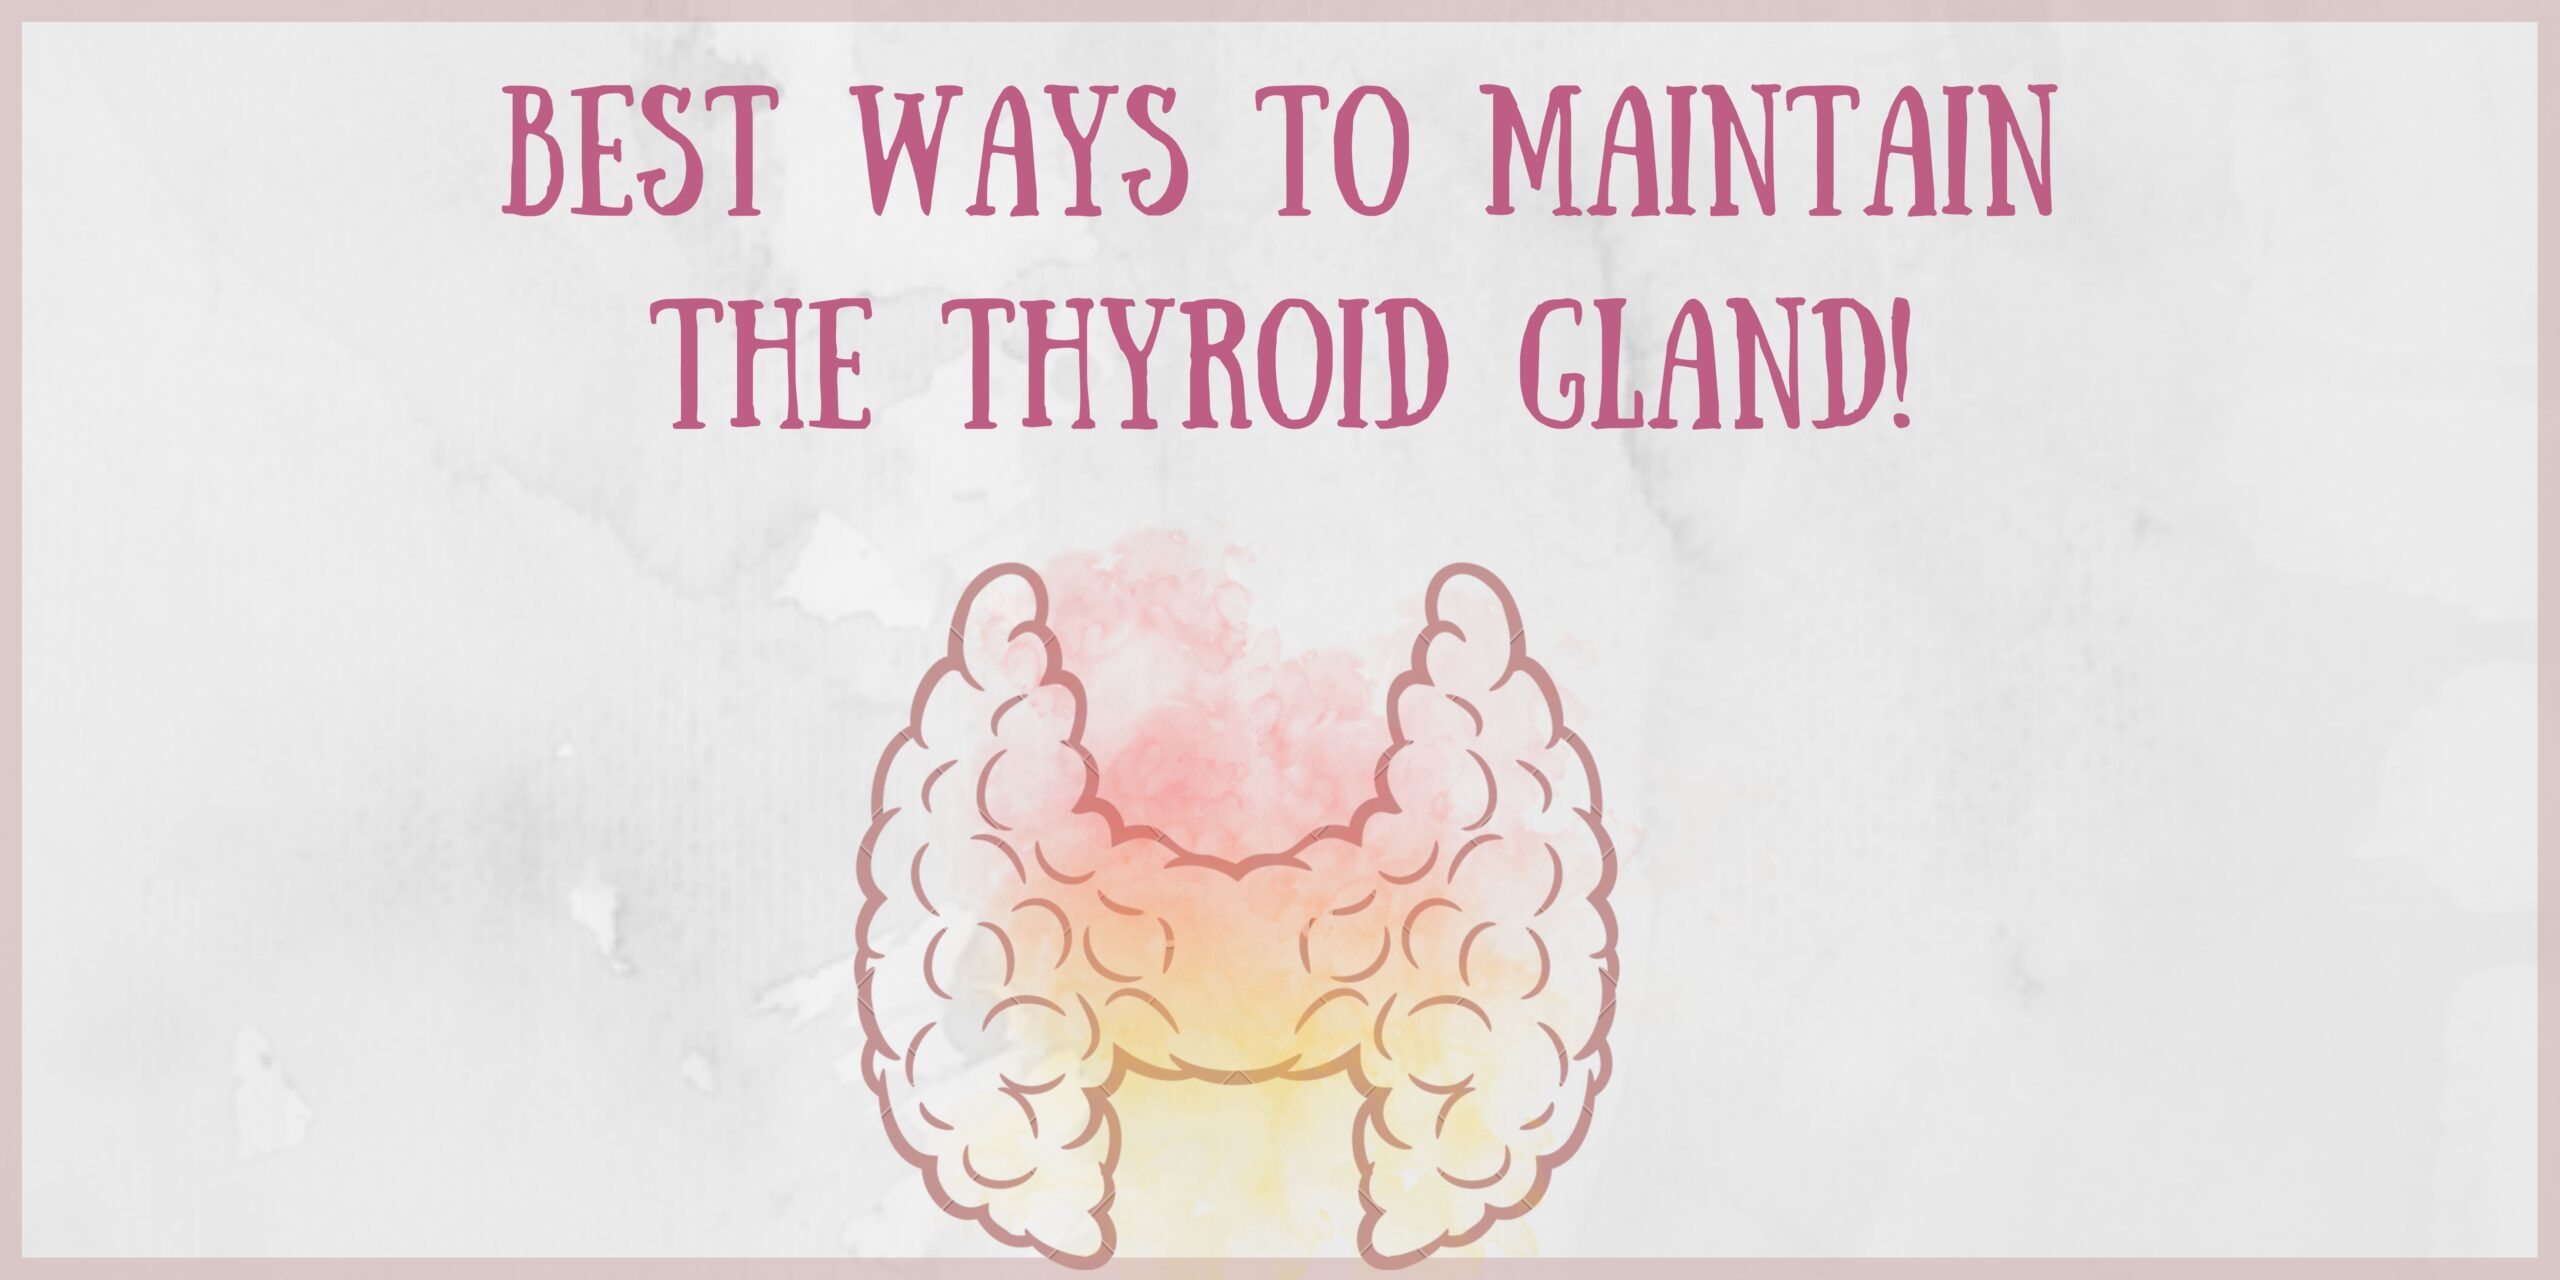 Best ways to maintain the Thyroid gland!